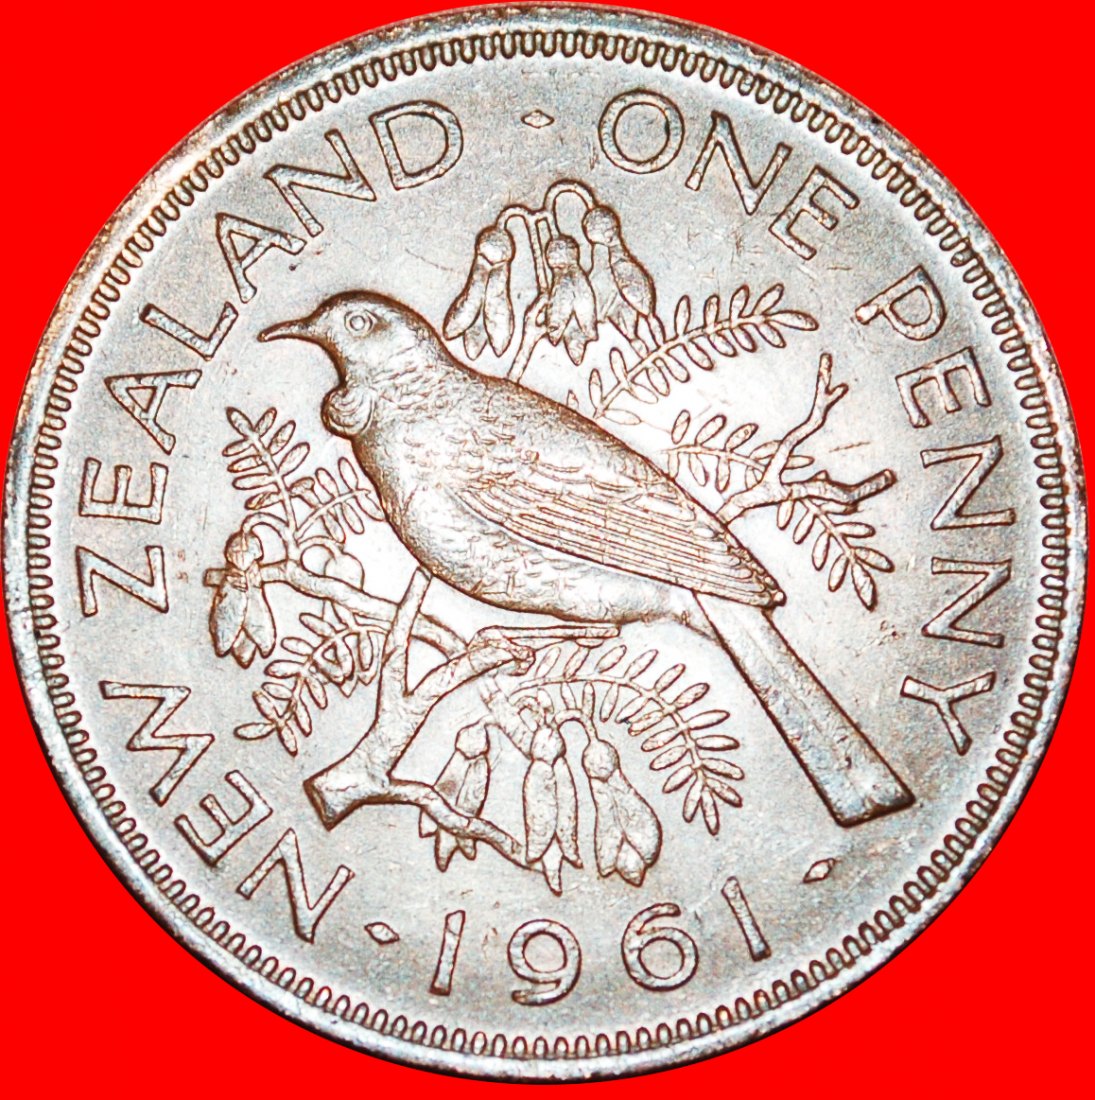  + BIRD AND FLOWERS: NEW ZEALAND ★ PENNY 1961 DRESSED QUEEN! LOW START ★ NO RESERVE!   